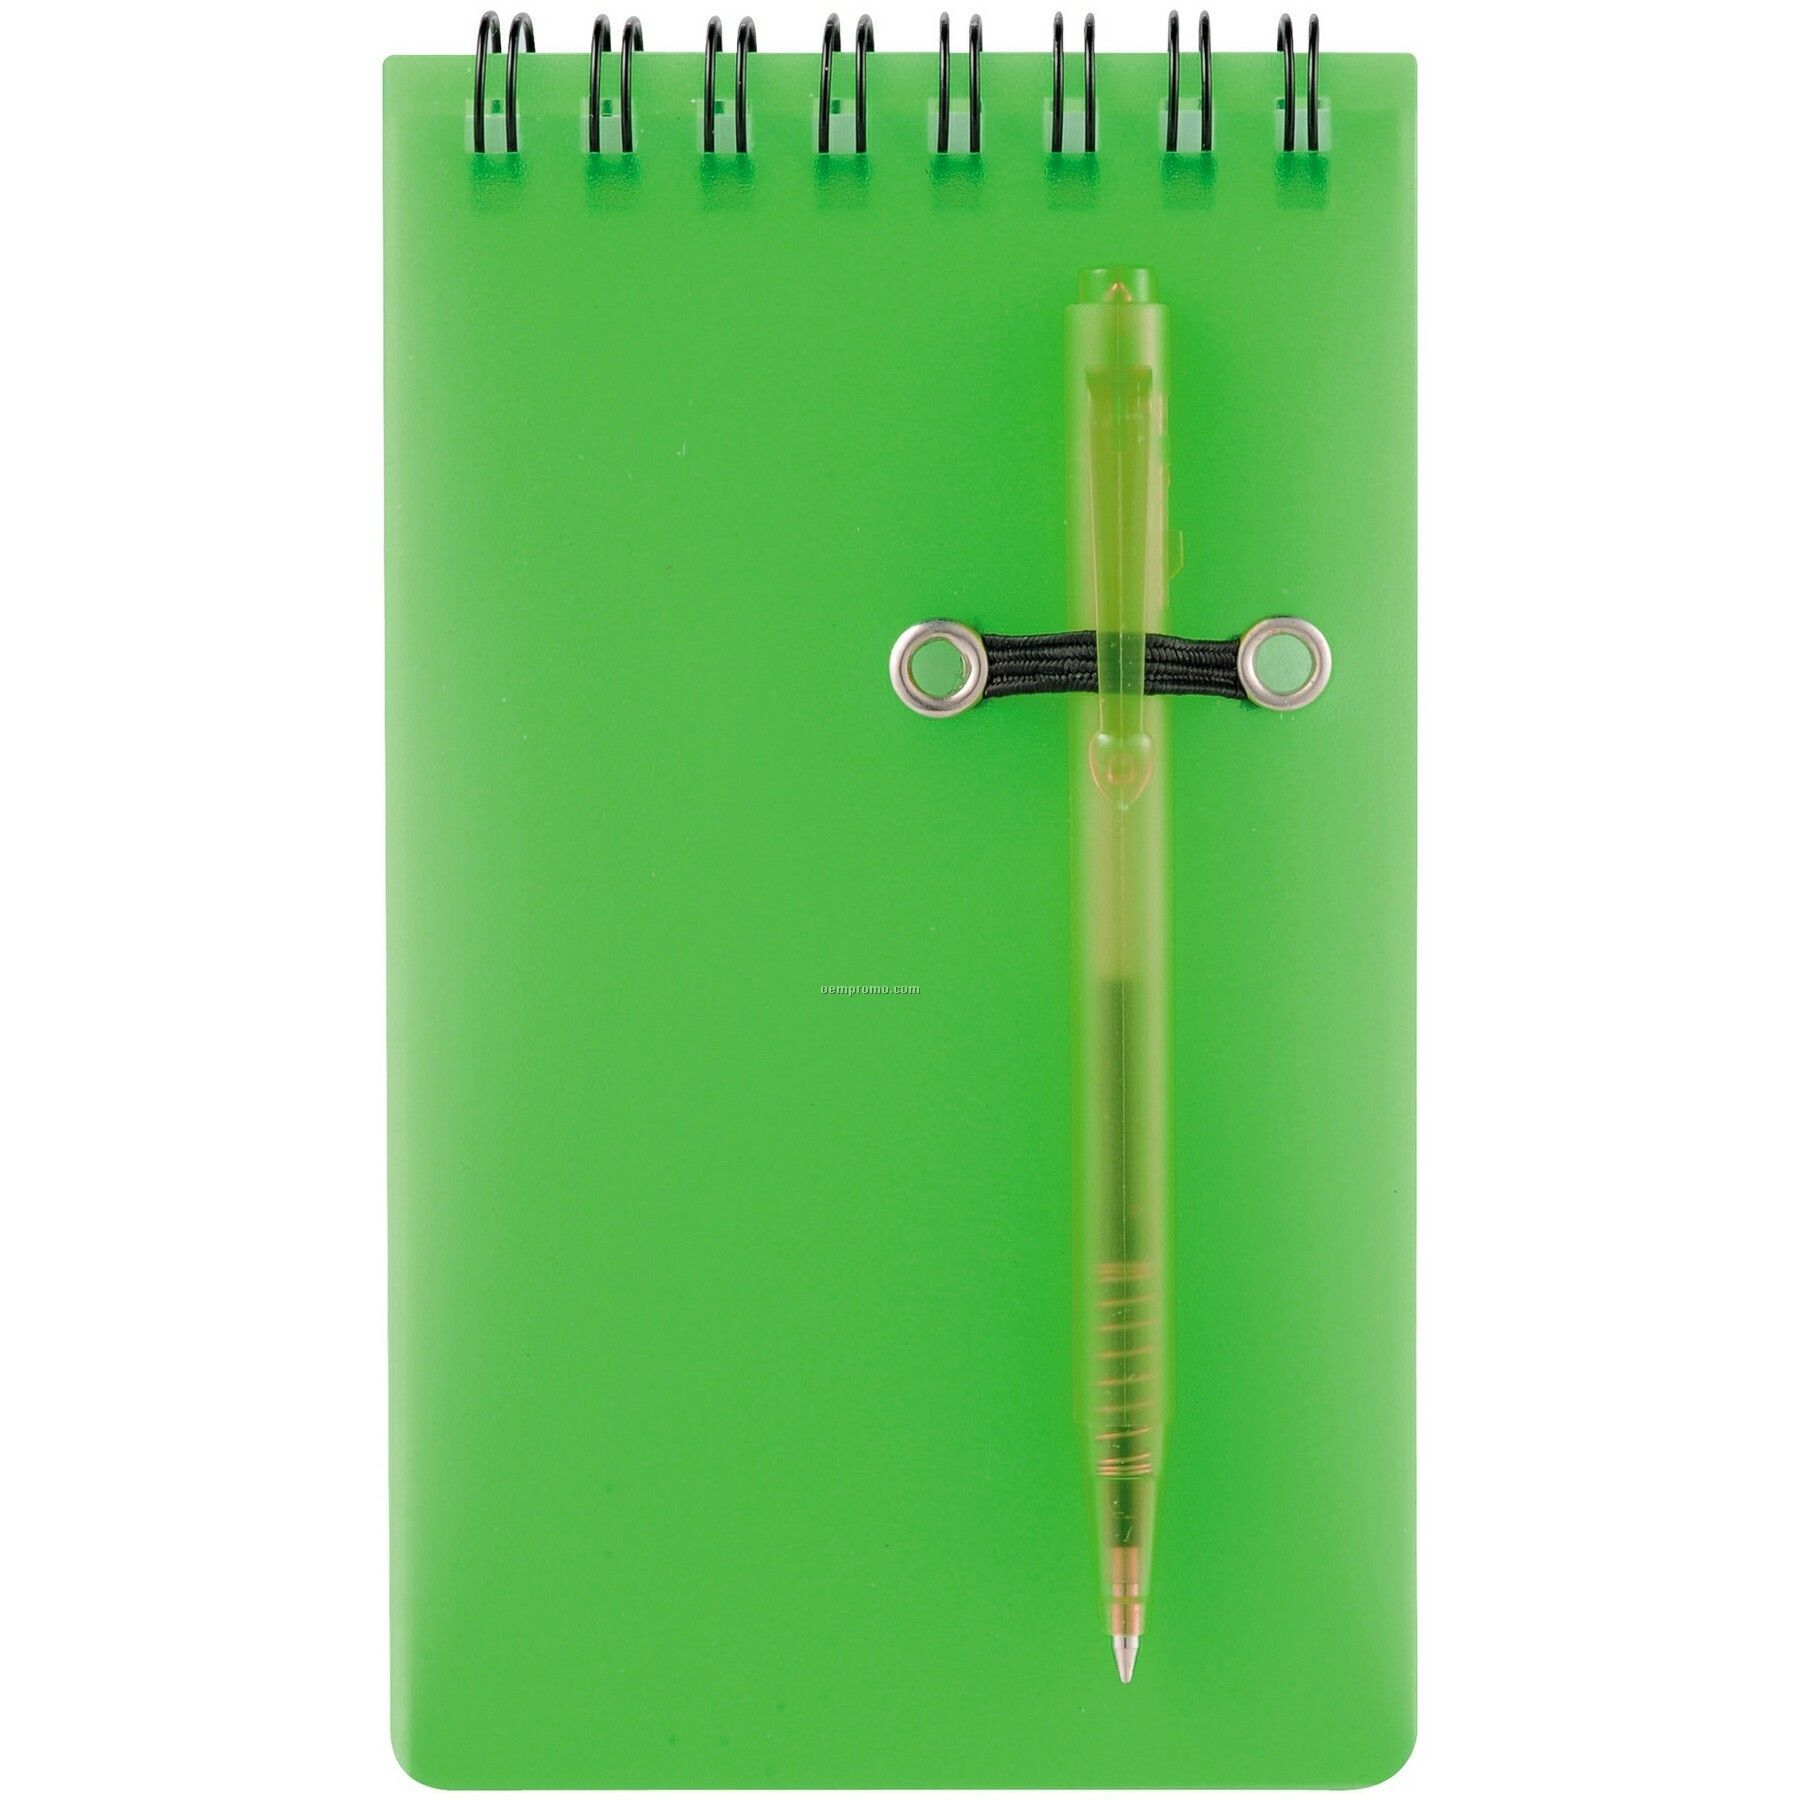 The Daily Spiral Jotter Notebook